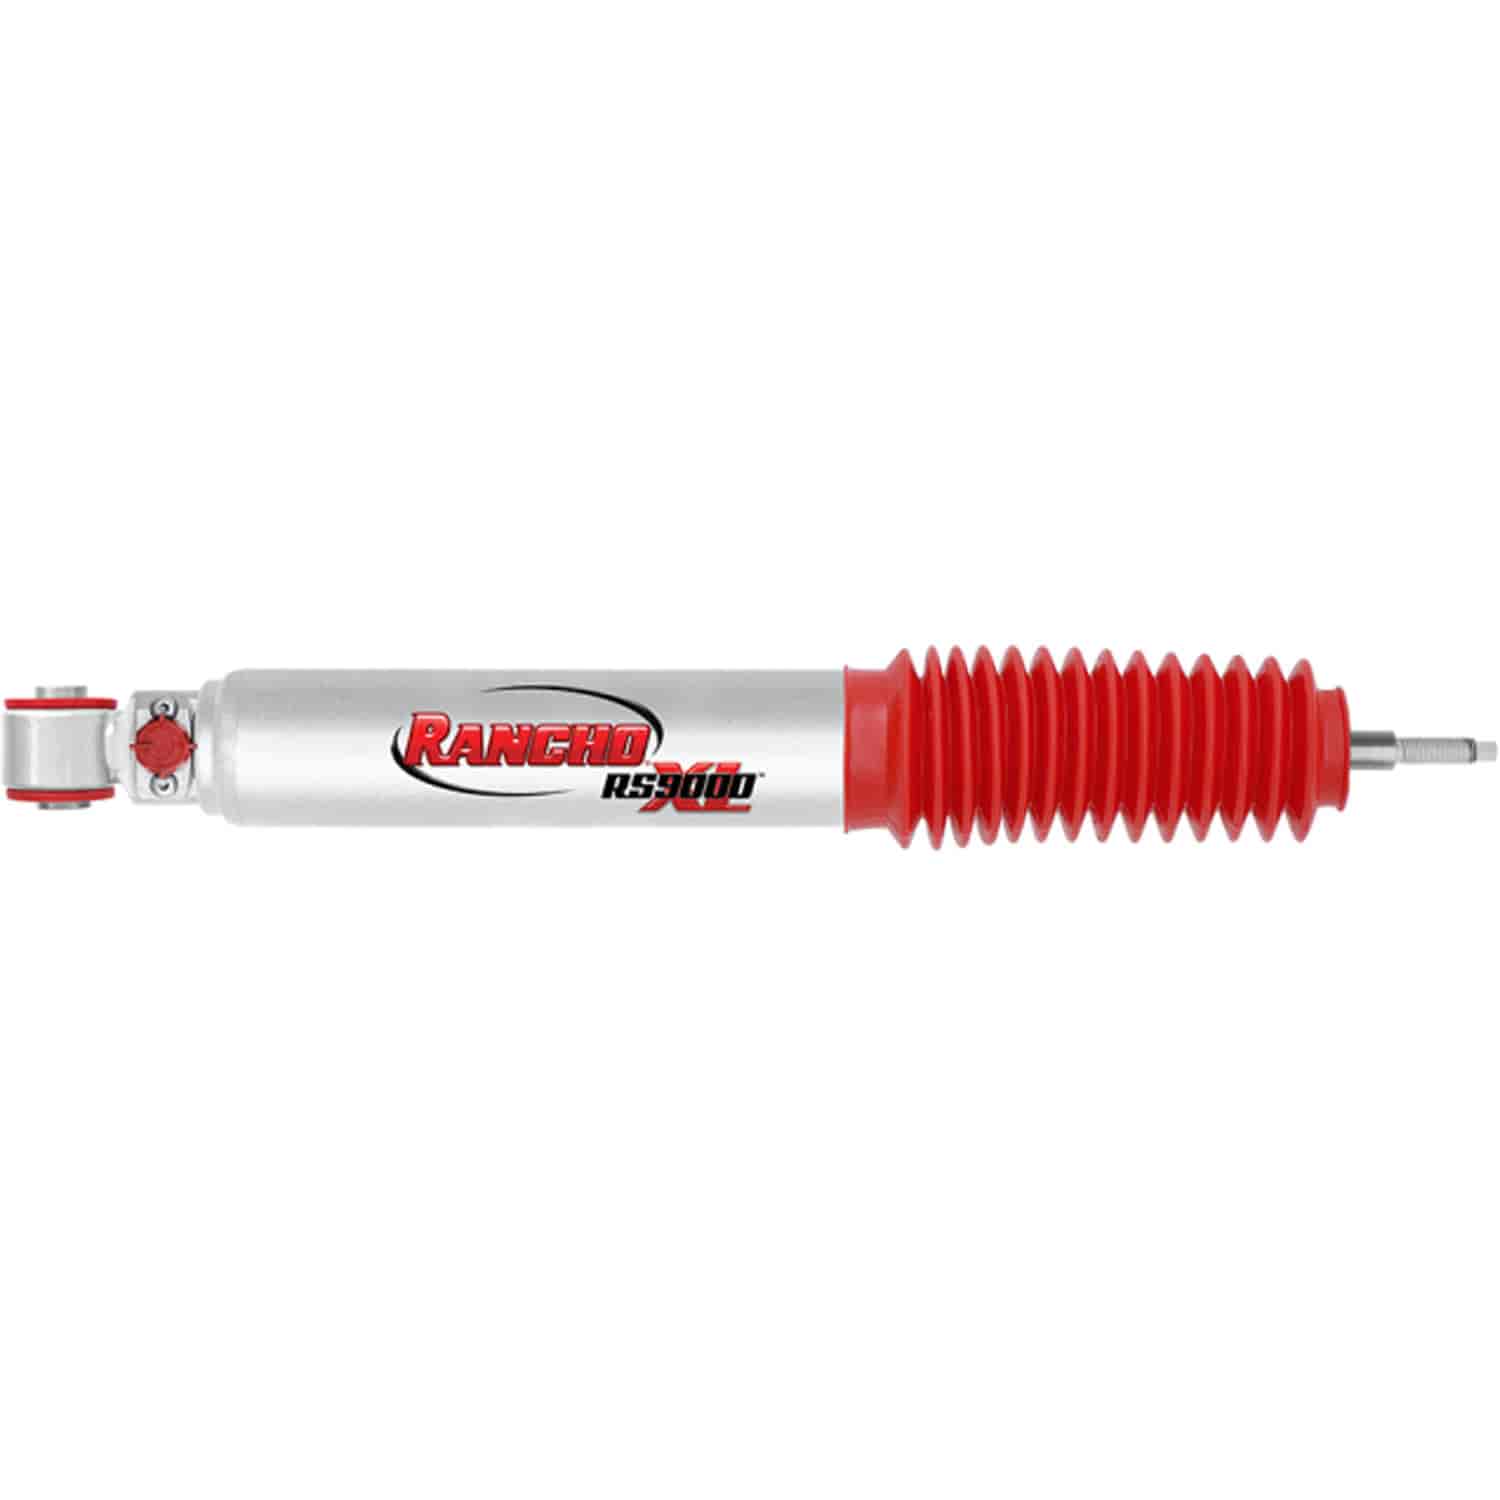 RS9000XL Front Shock Absorber Fits Ford Maverick, for Nissan Pathfinder and Terano